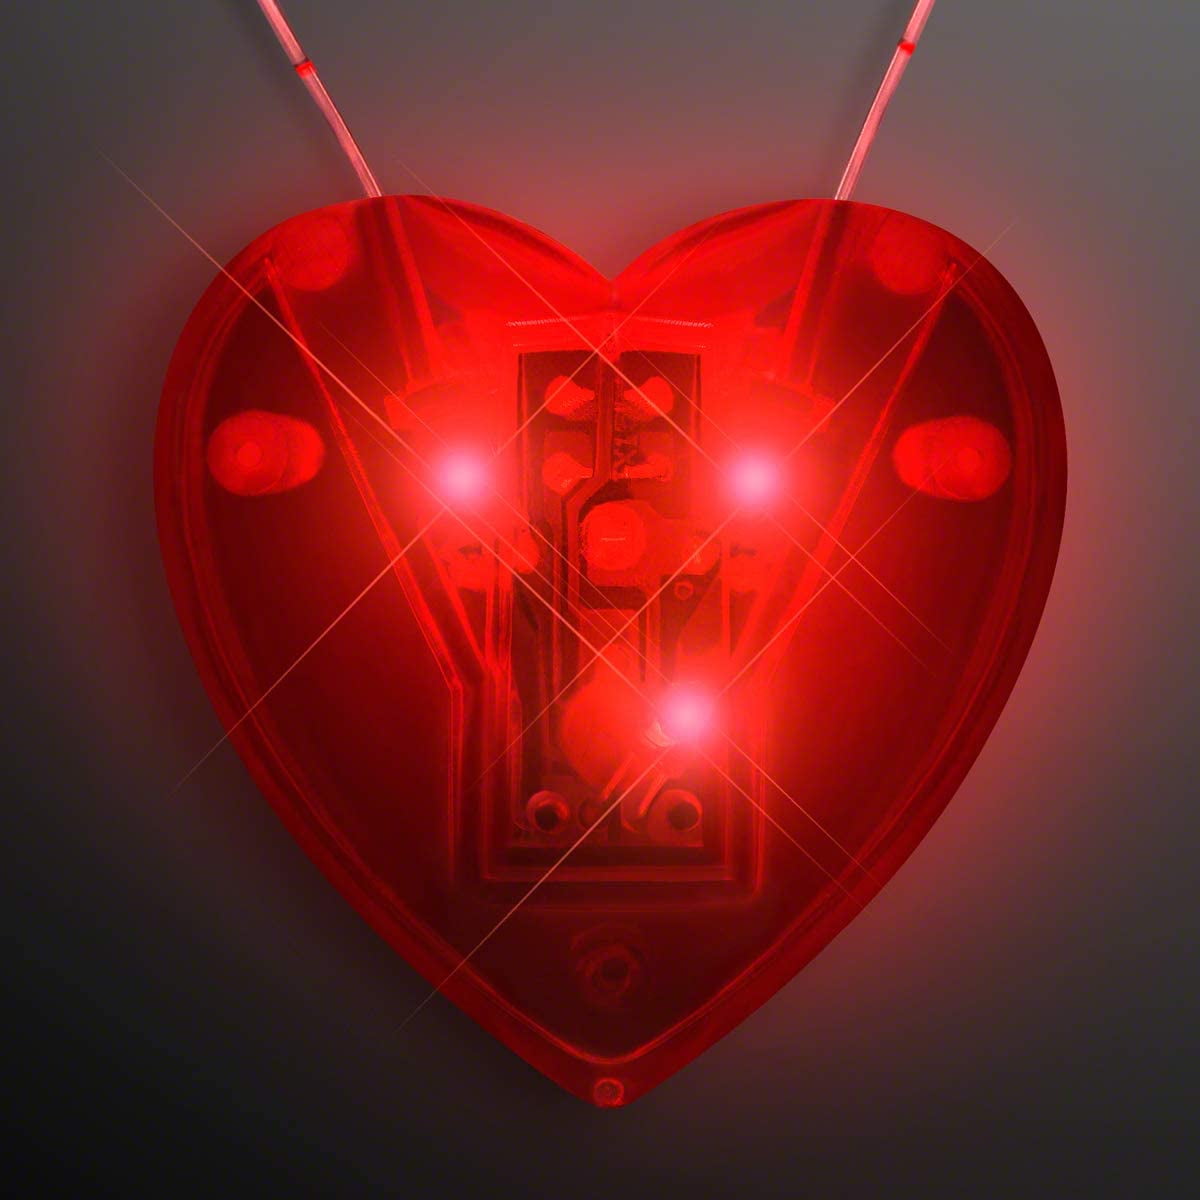 Light Up Heart Necklace On Red Beads [LMP004-1233] 